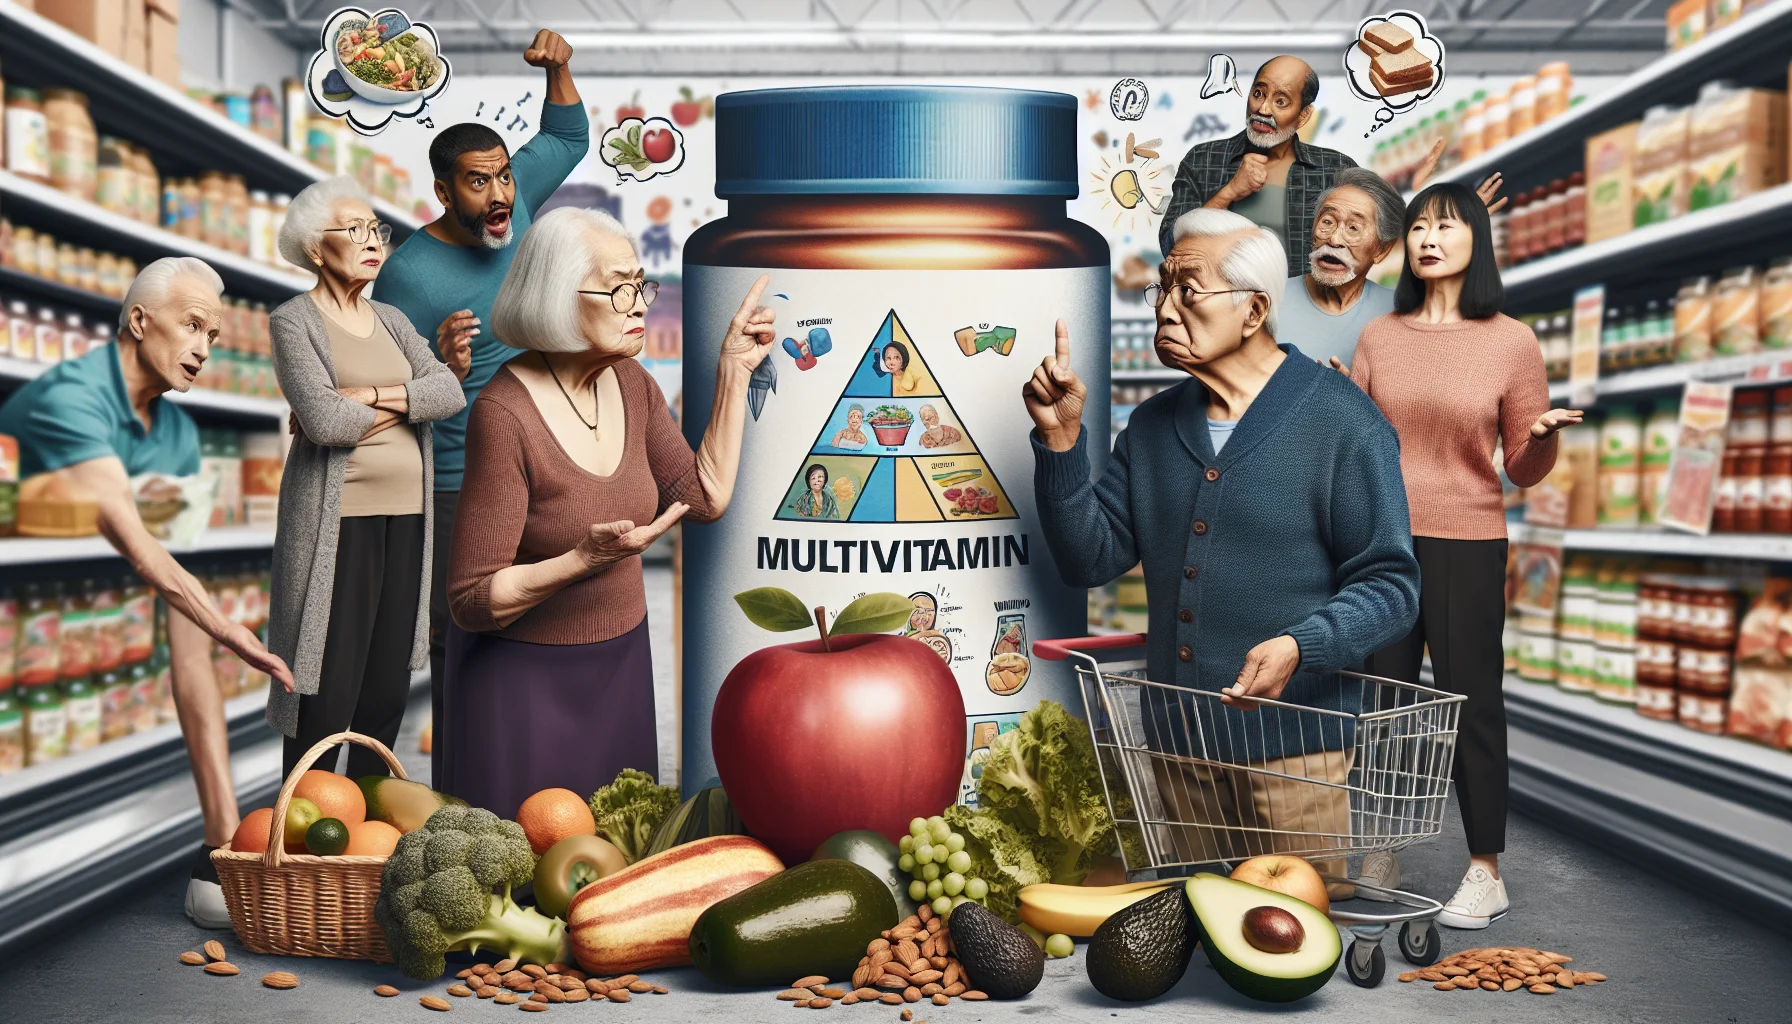 Craft a humorous image showing an elderly South Asian couple in grocery store. The woman is examining a multivitamin bottle labeled 'Best for 70+' with a curious look, while the man is having a light-hearted argument with a bright red apple. Nearby, a risible visualization of a food pyramid suggests a diet heavy in multivitamins and light on fried foods. In the background, other elderly individuals of different descents: Black, East Asian, Hispanic, Middle-Eastern, and White, are carrying various healthy foods like broccoli, avocados, whole grain bread, and almonds in their basket. All seniors in the image depict a sense of humor while interacting with healthy food items.